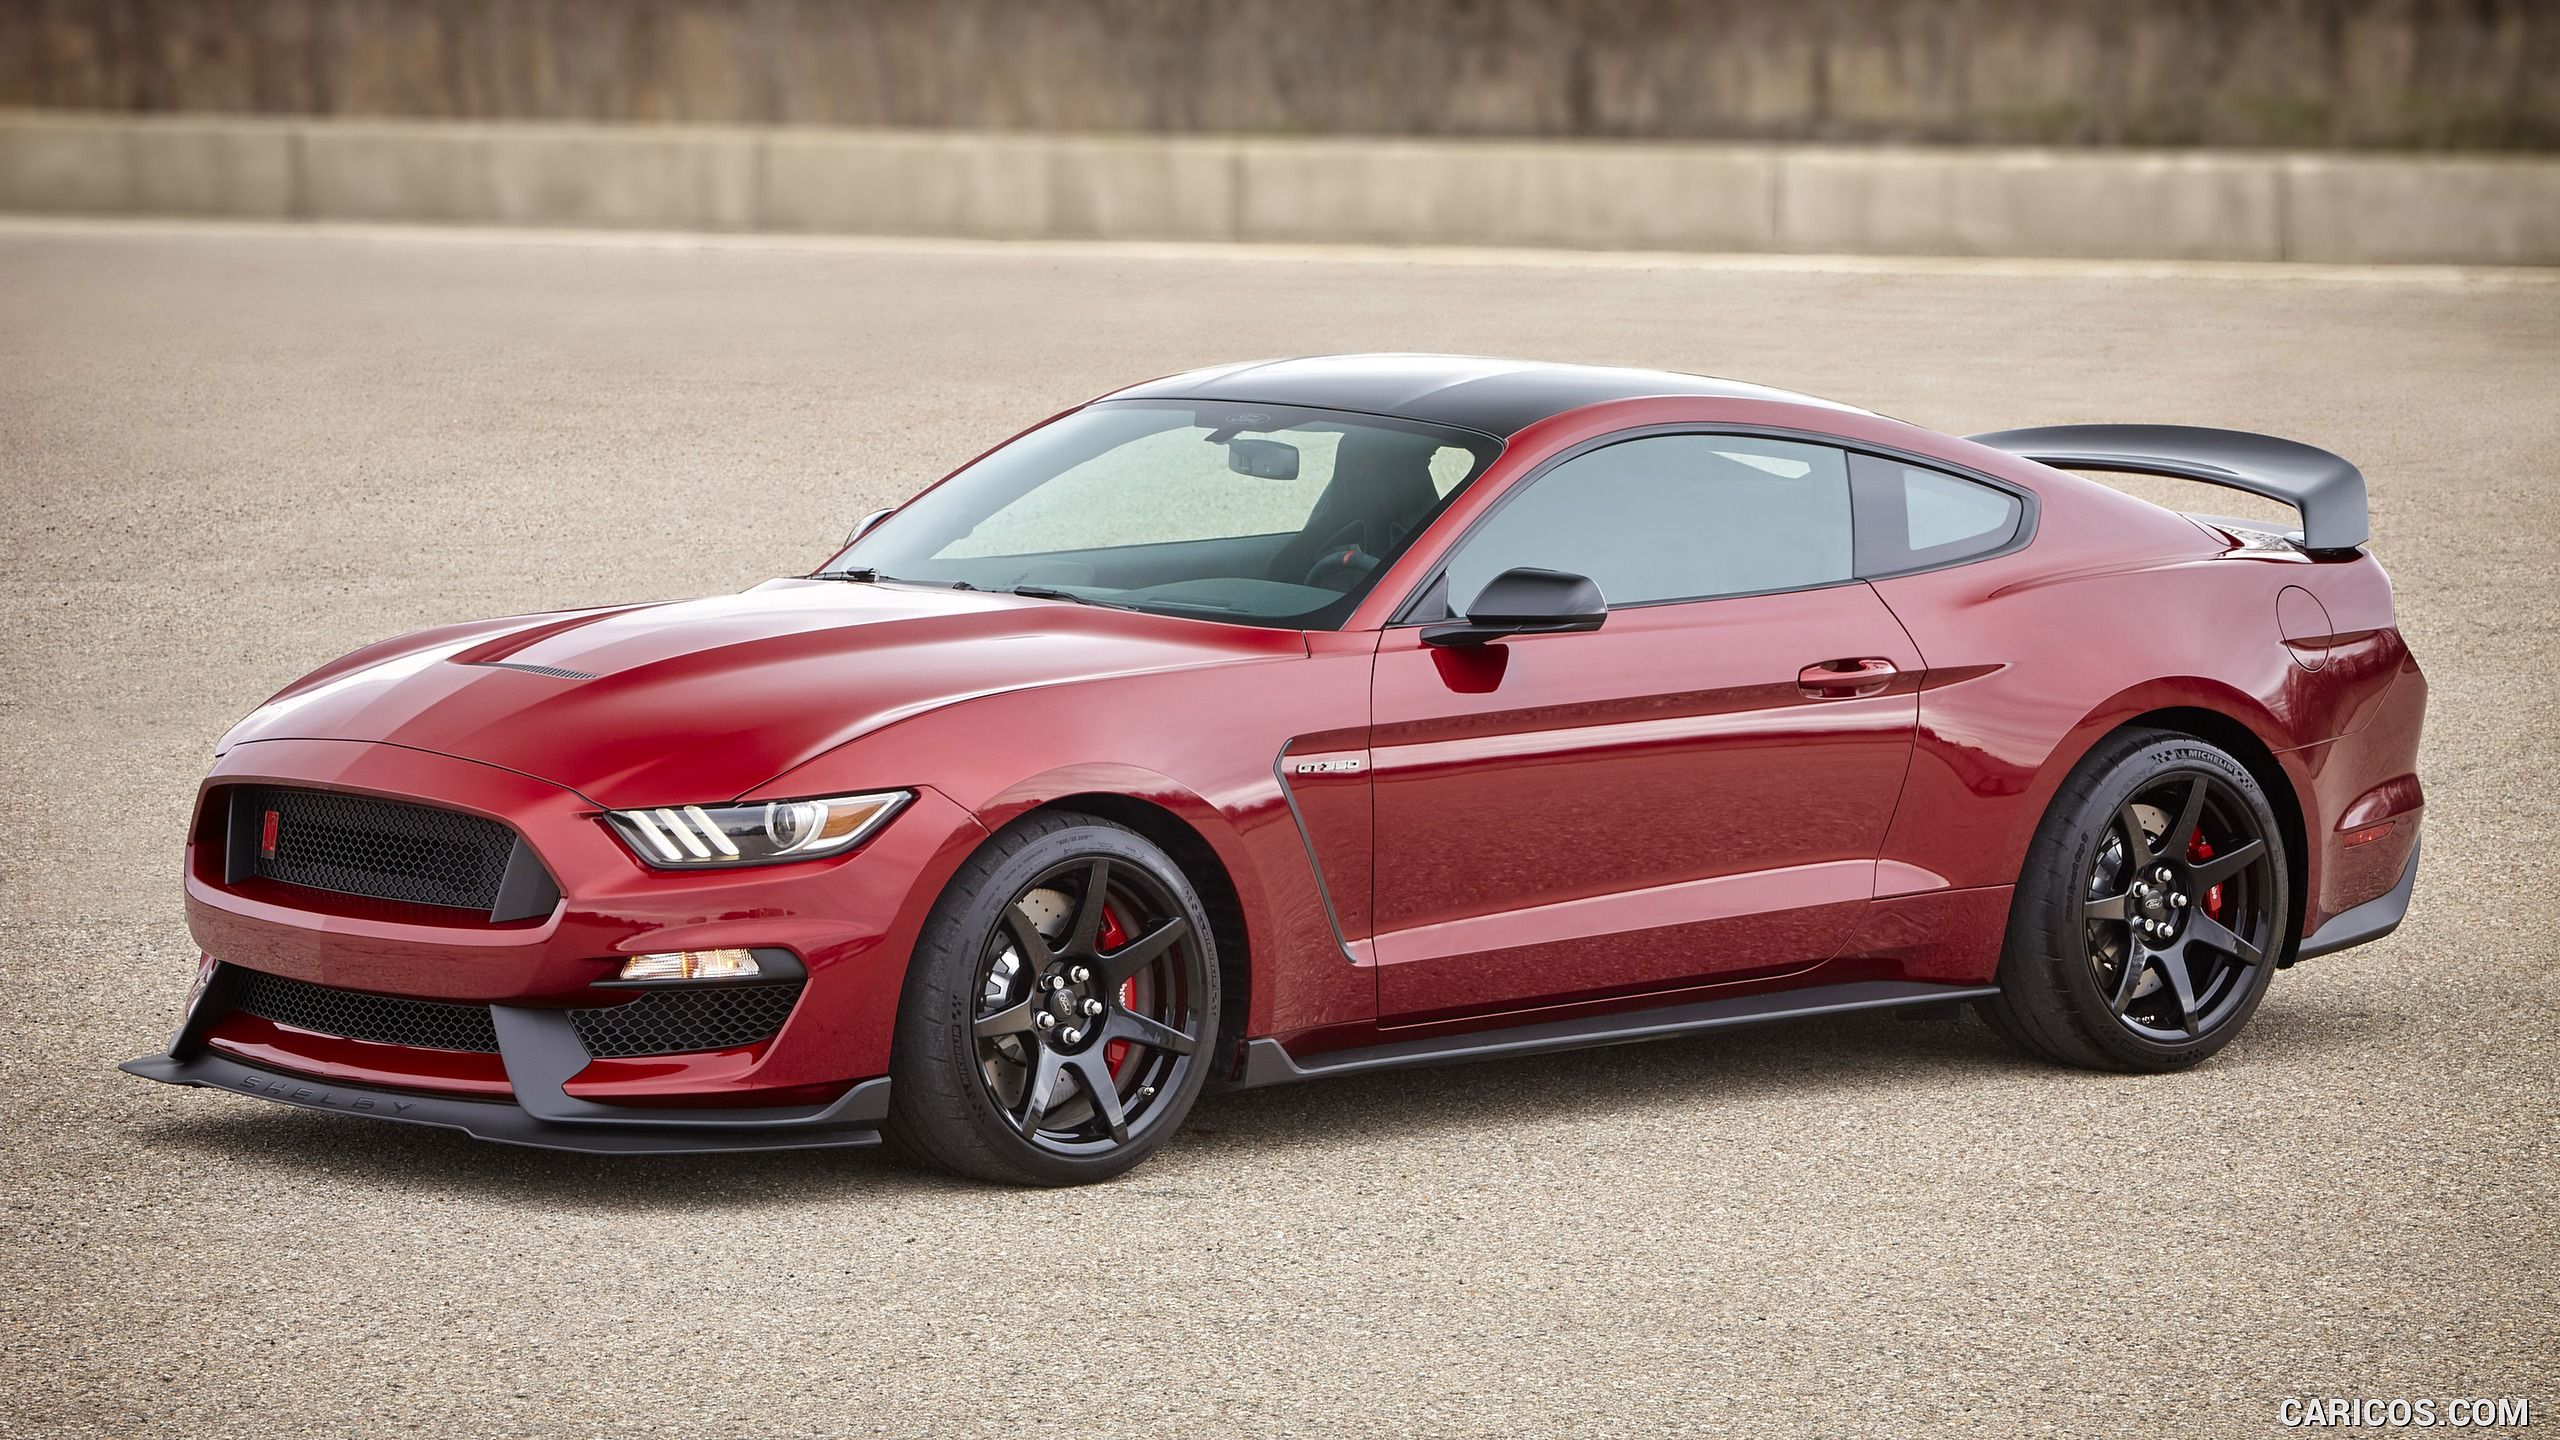 Ford Mustang Shelby Gt350 And Gt350r Wallpaper Dream Car